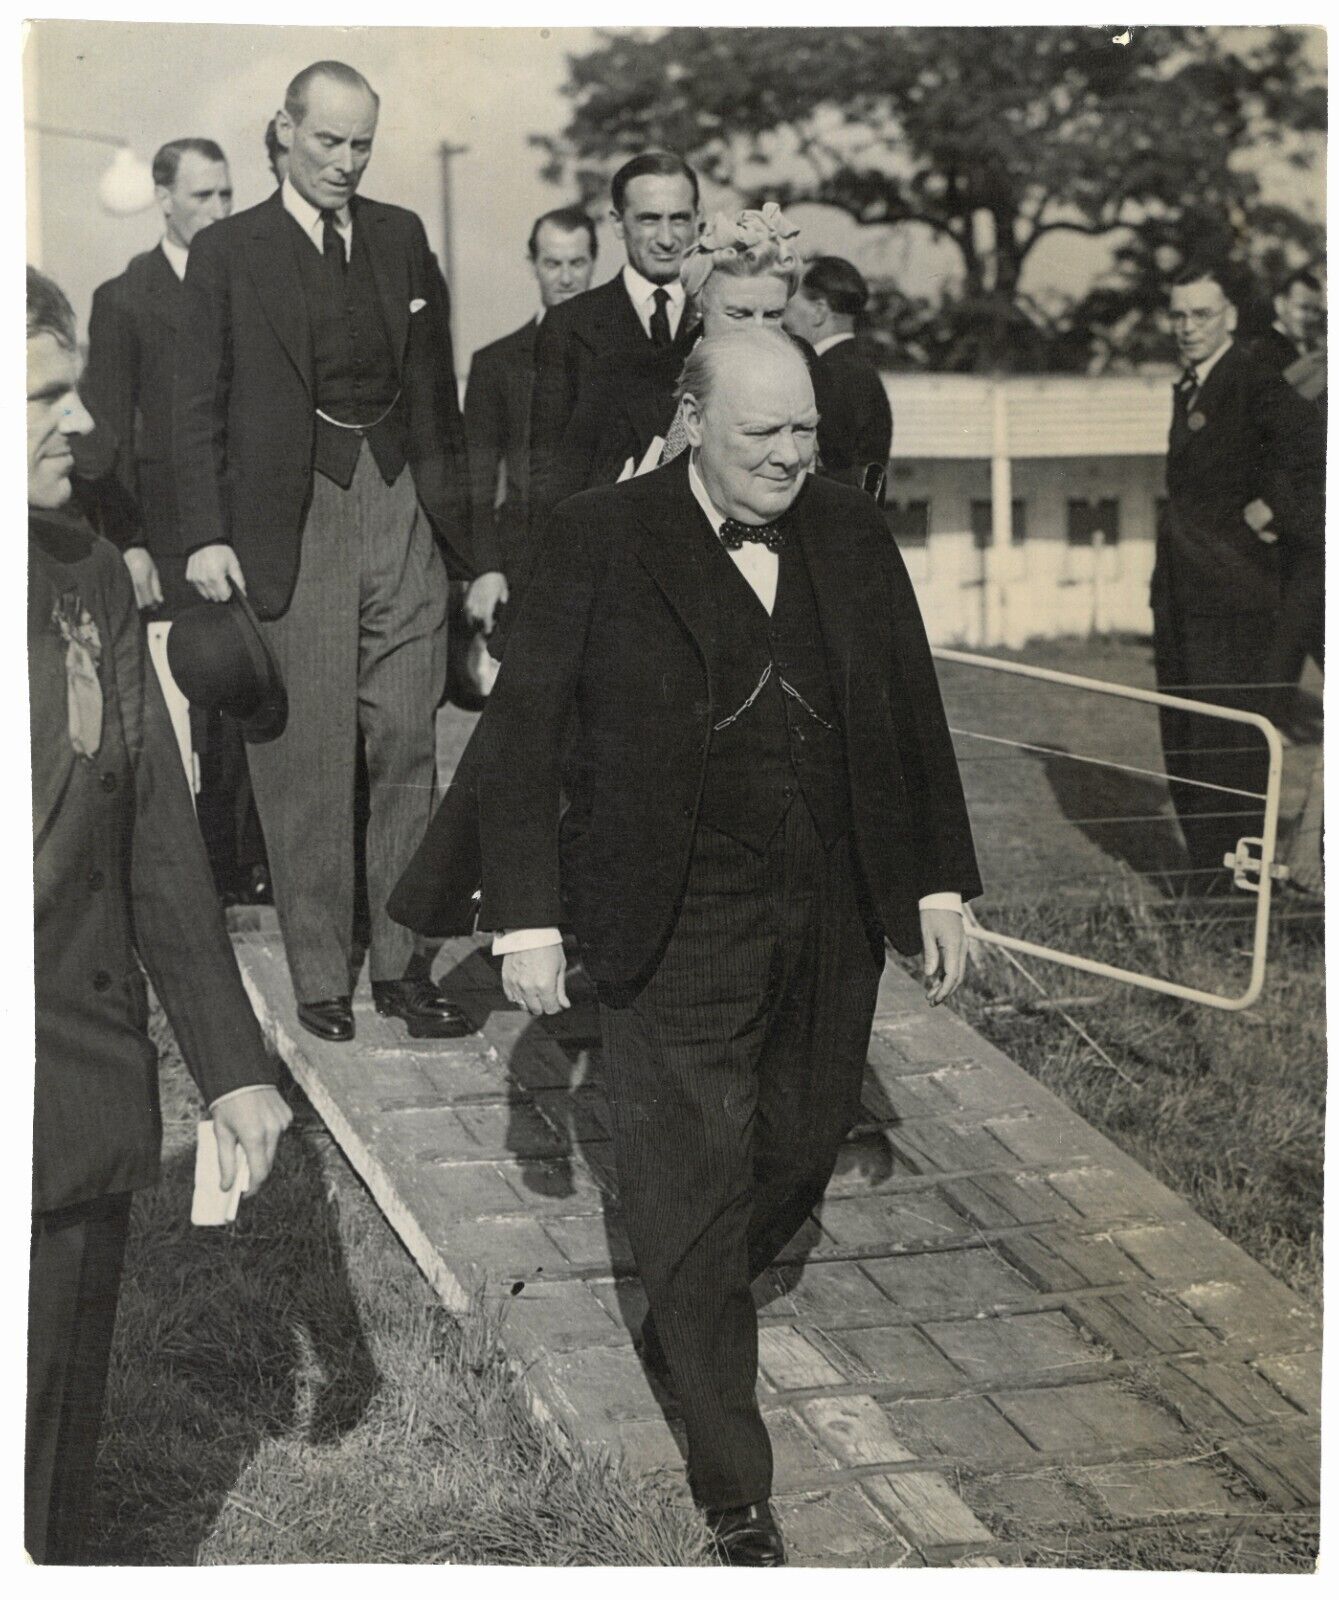 July 1945 press photo of Churchill campaigning for the General Election